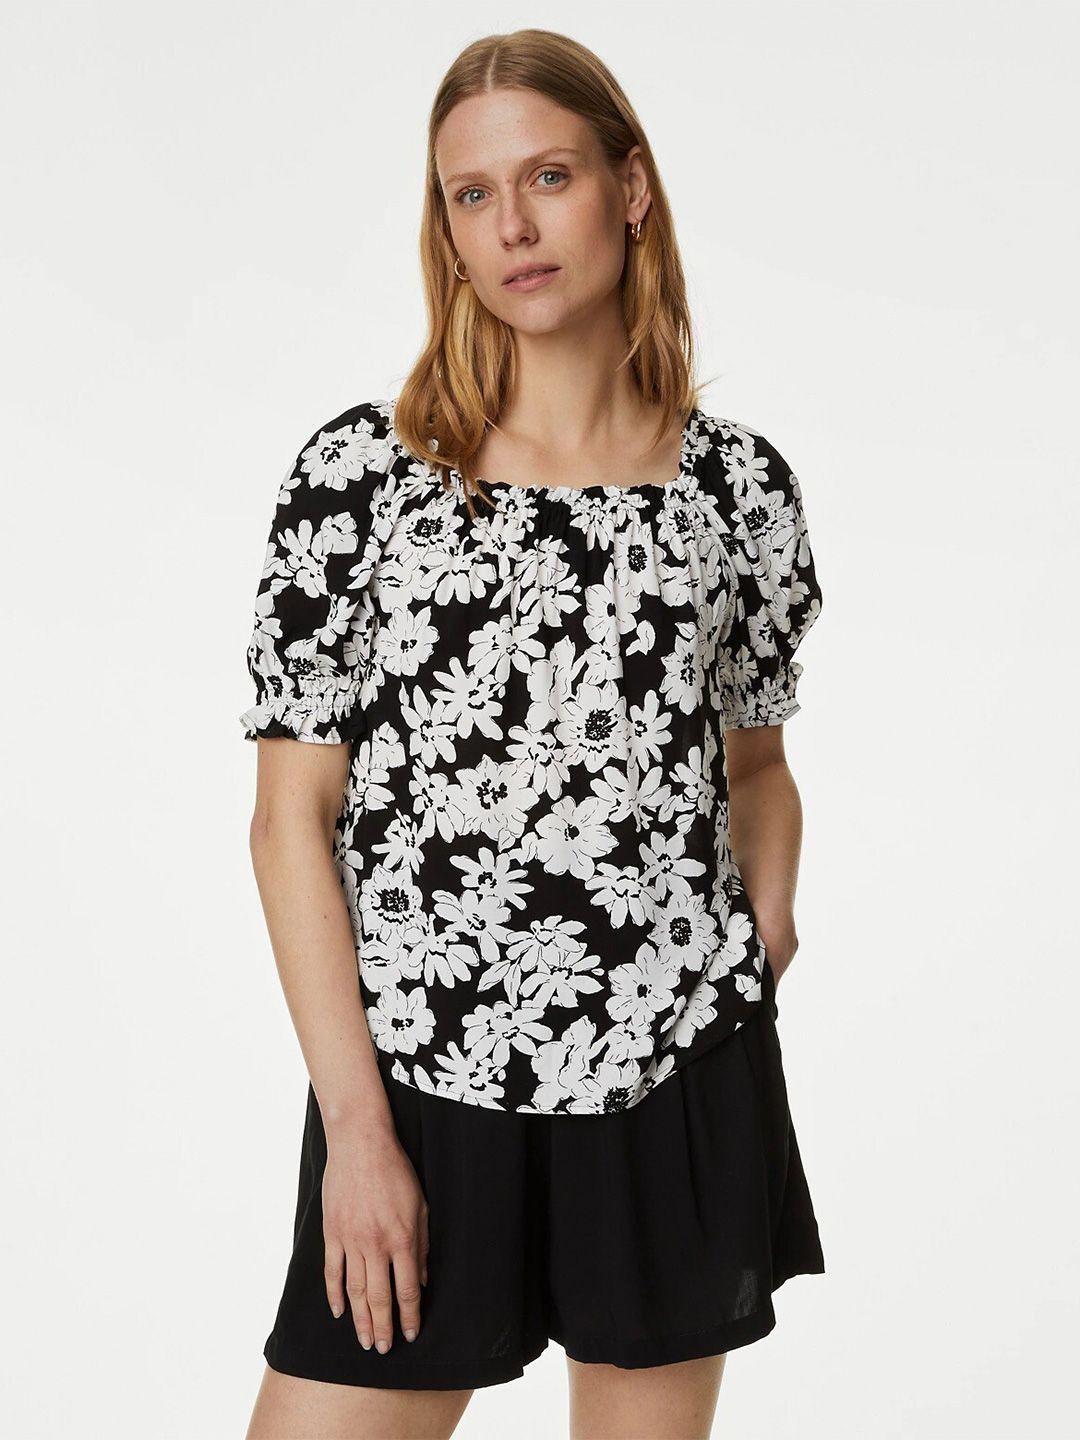 marks-&-spencer-floral-printed-puff-sleeves-gathered-top